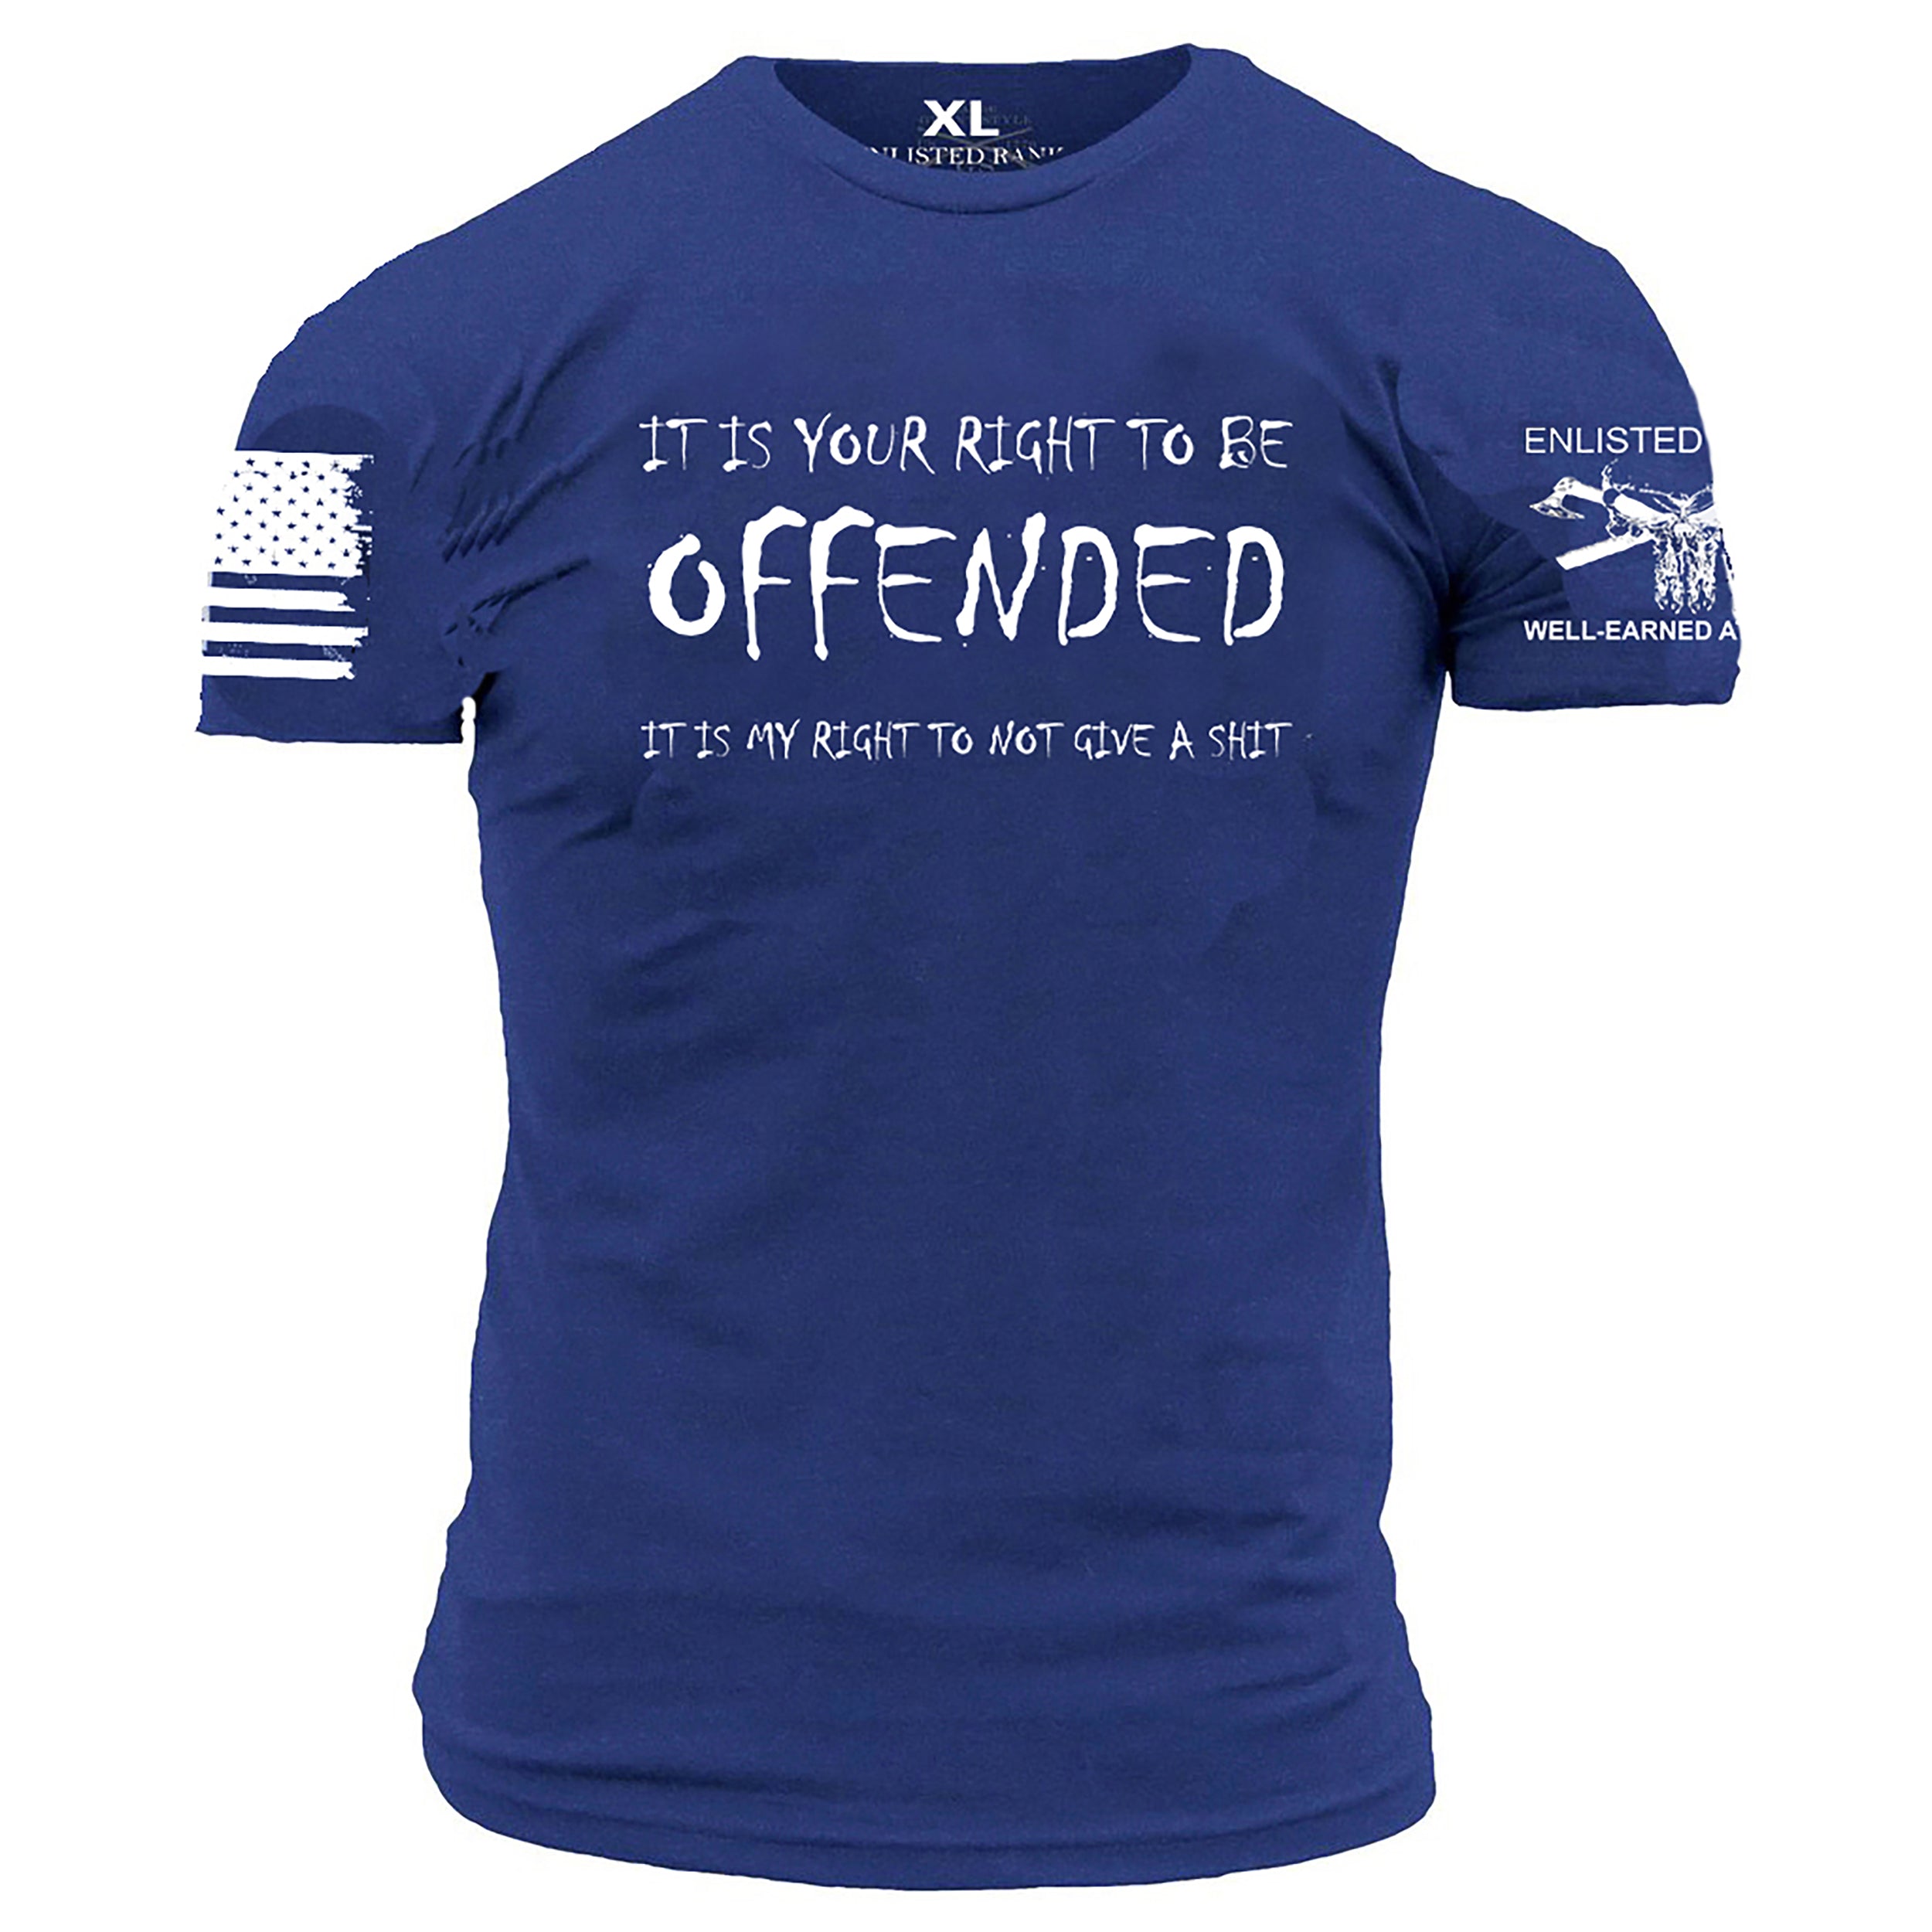 OFFENDED